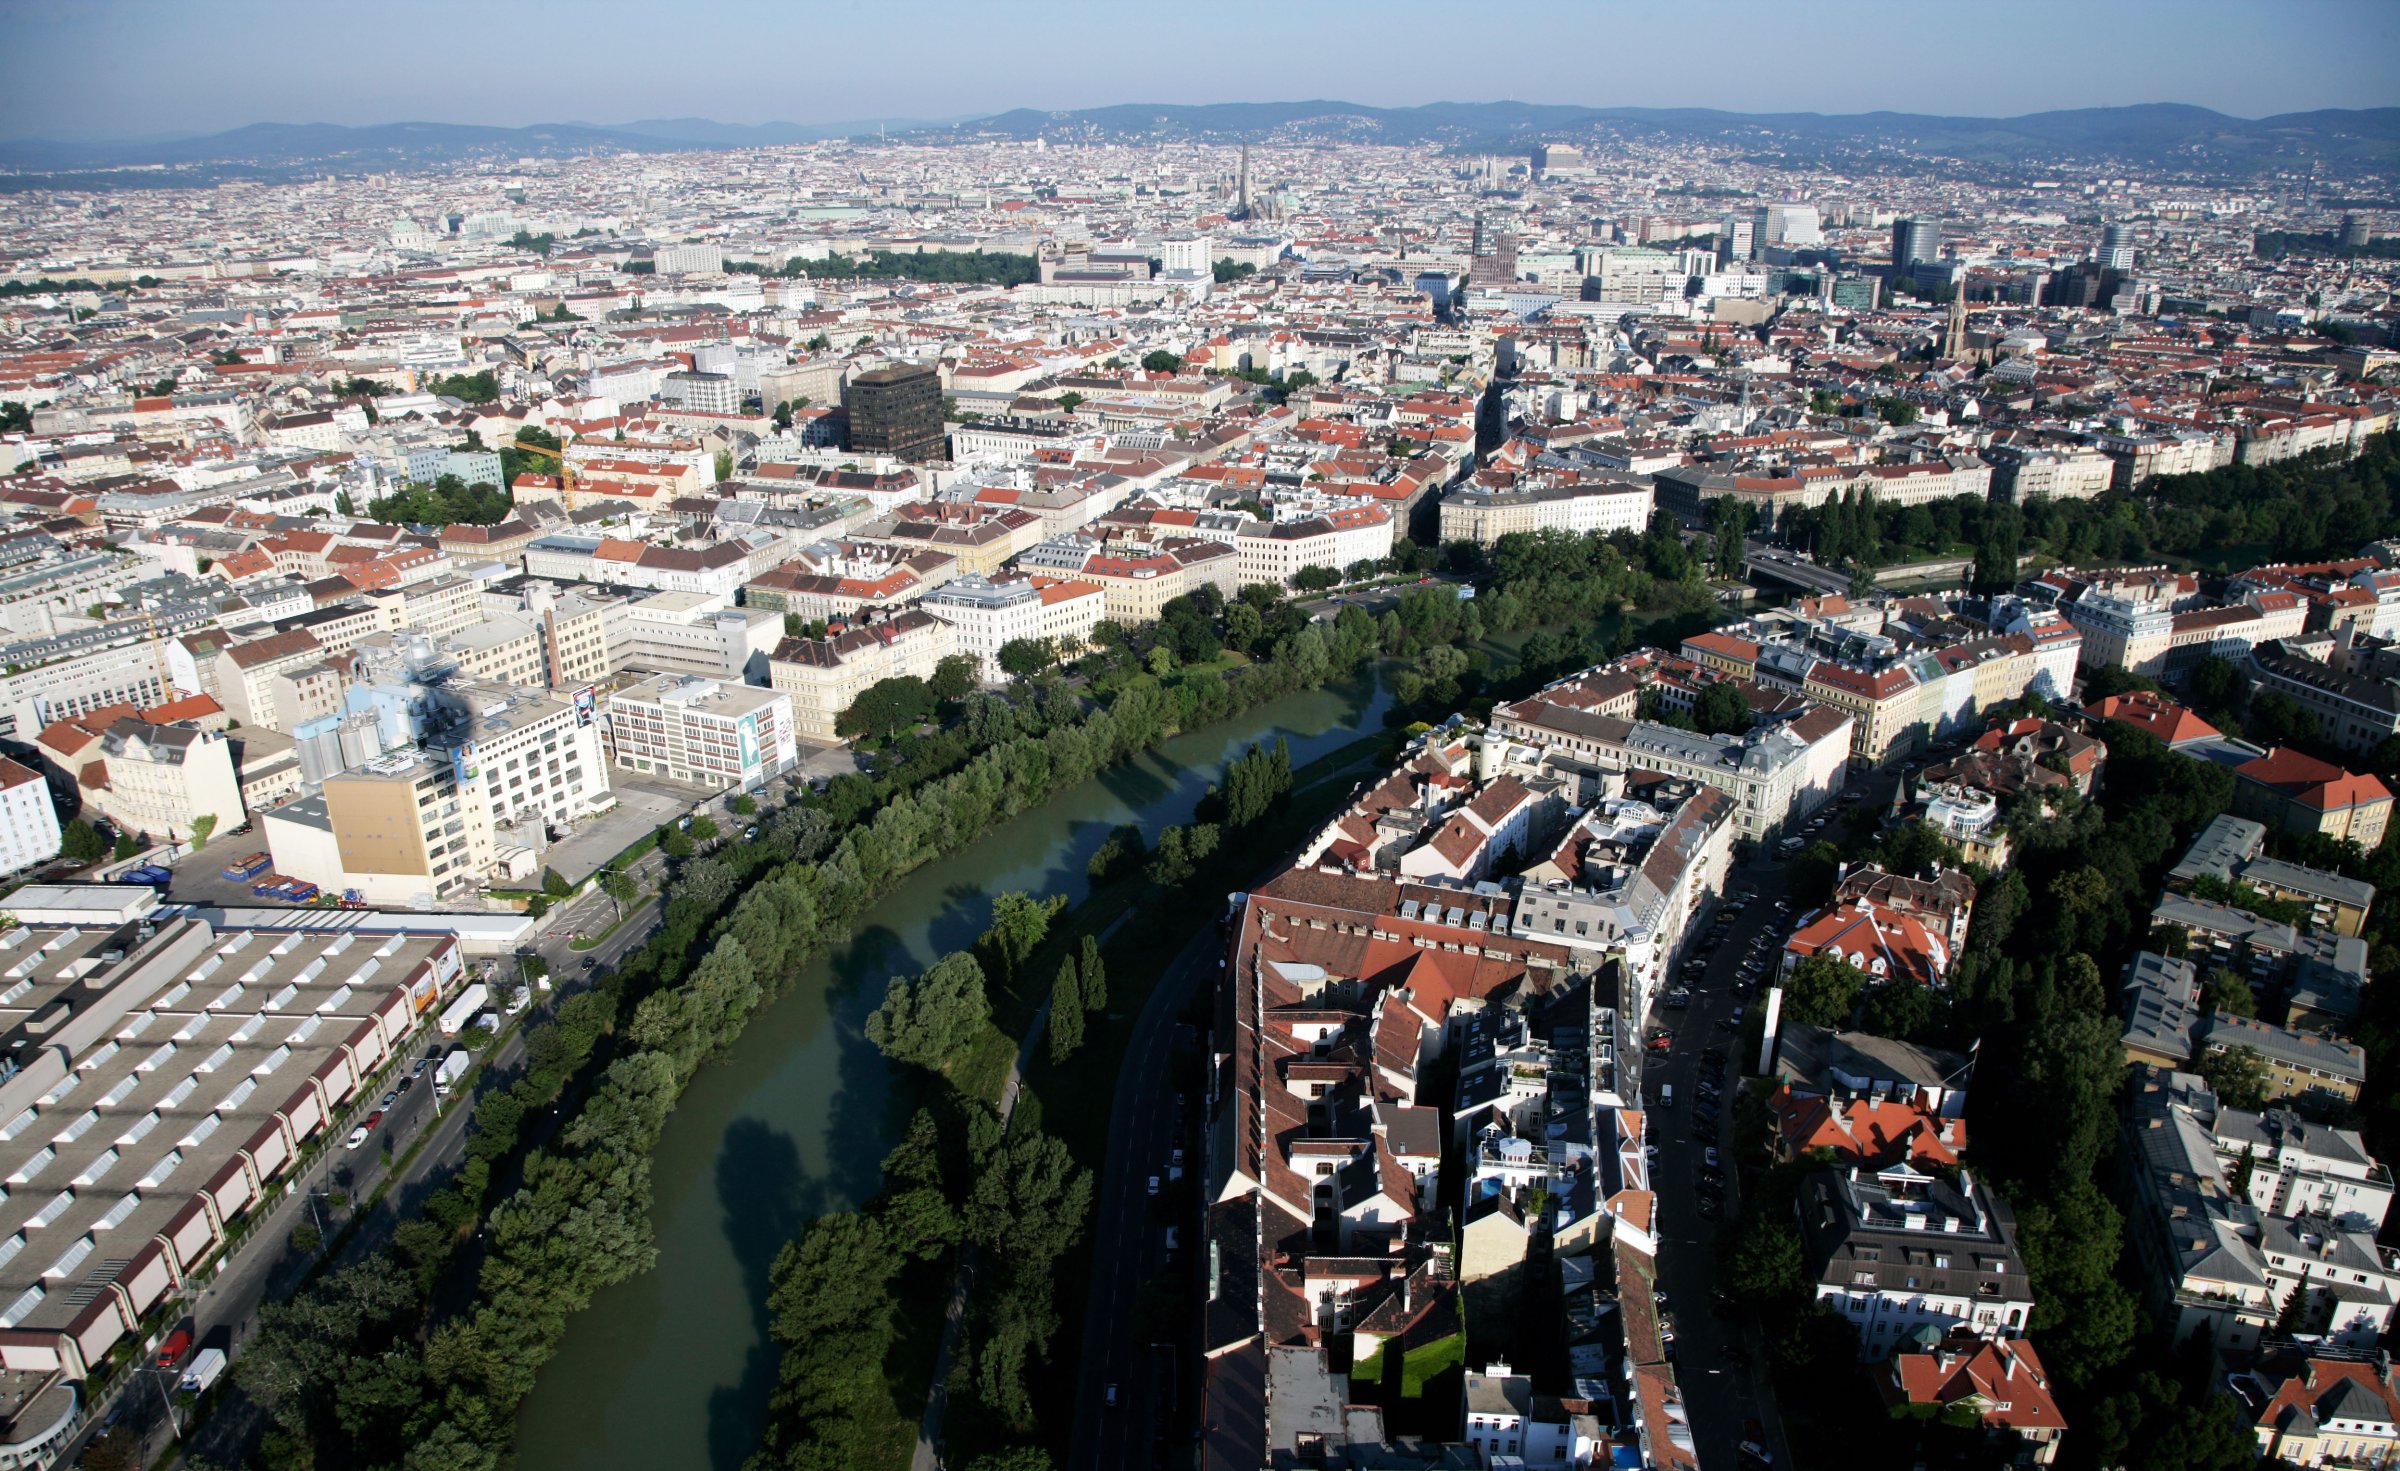 A general view of Vienna showing the River Danube on Jun. 22, 2008 in Vienna, Austria.